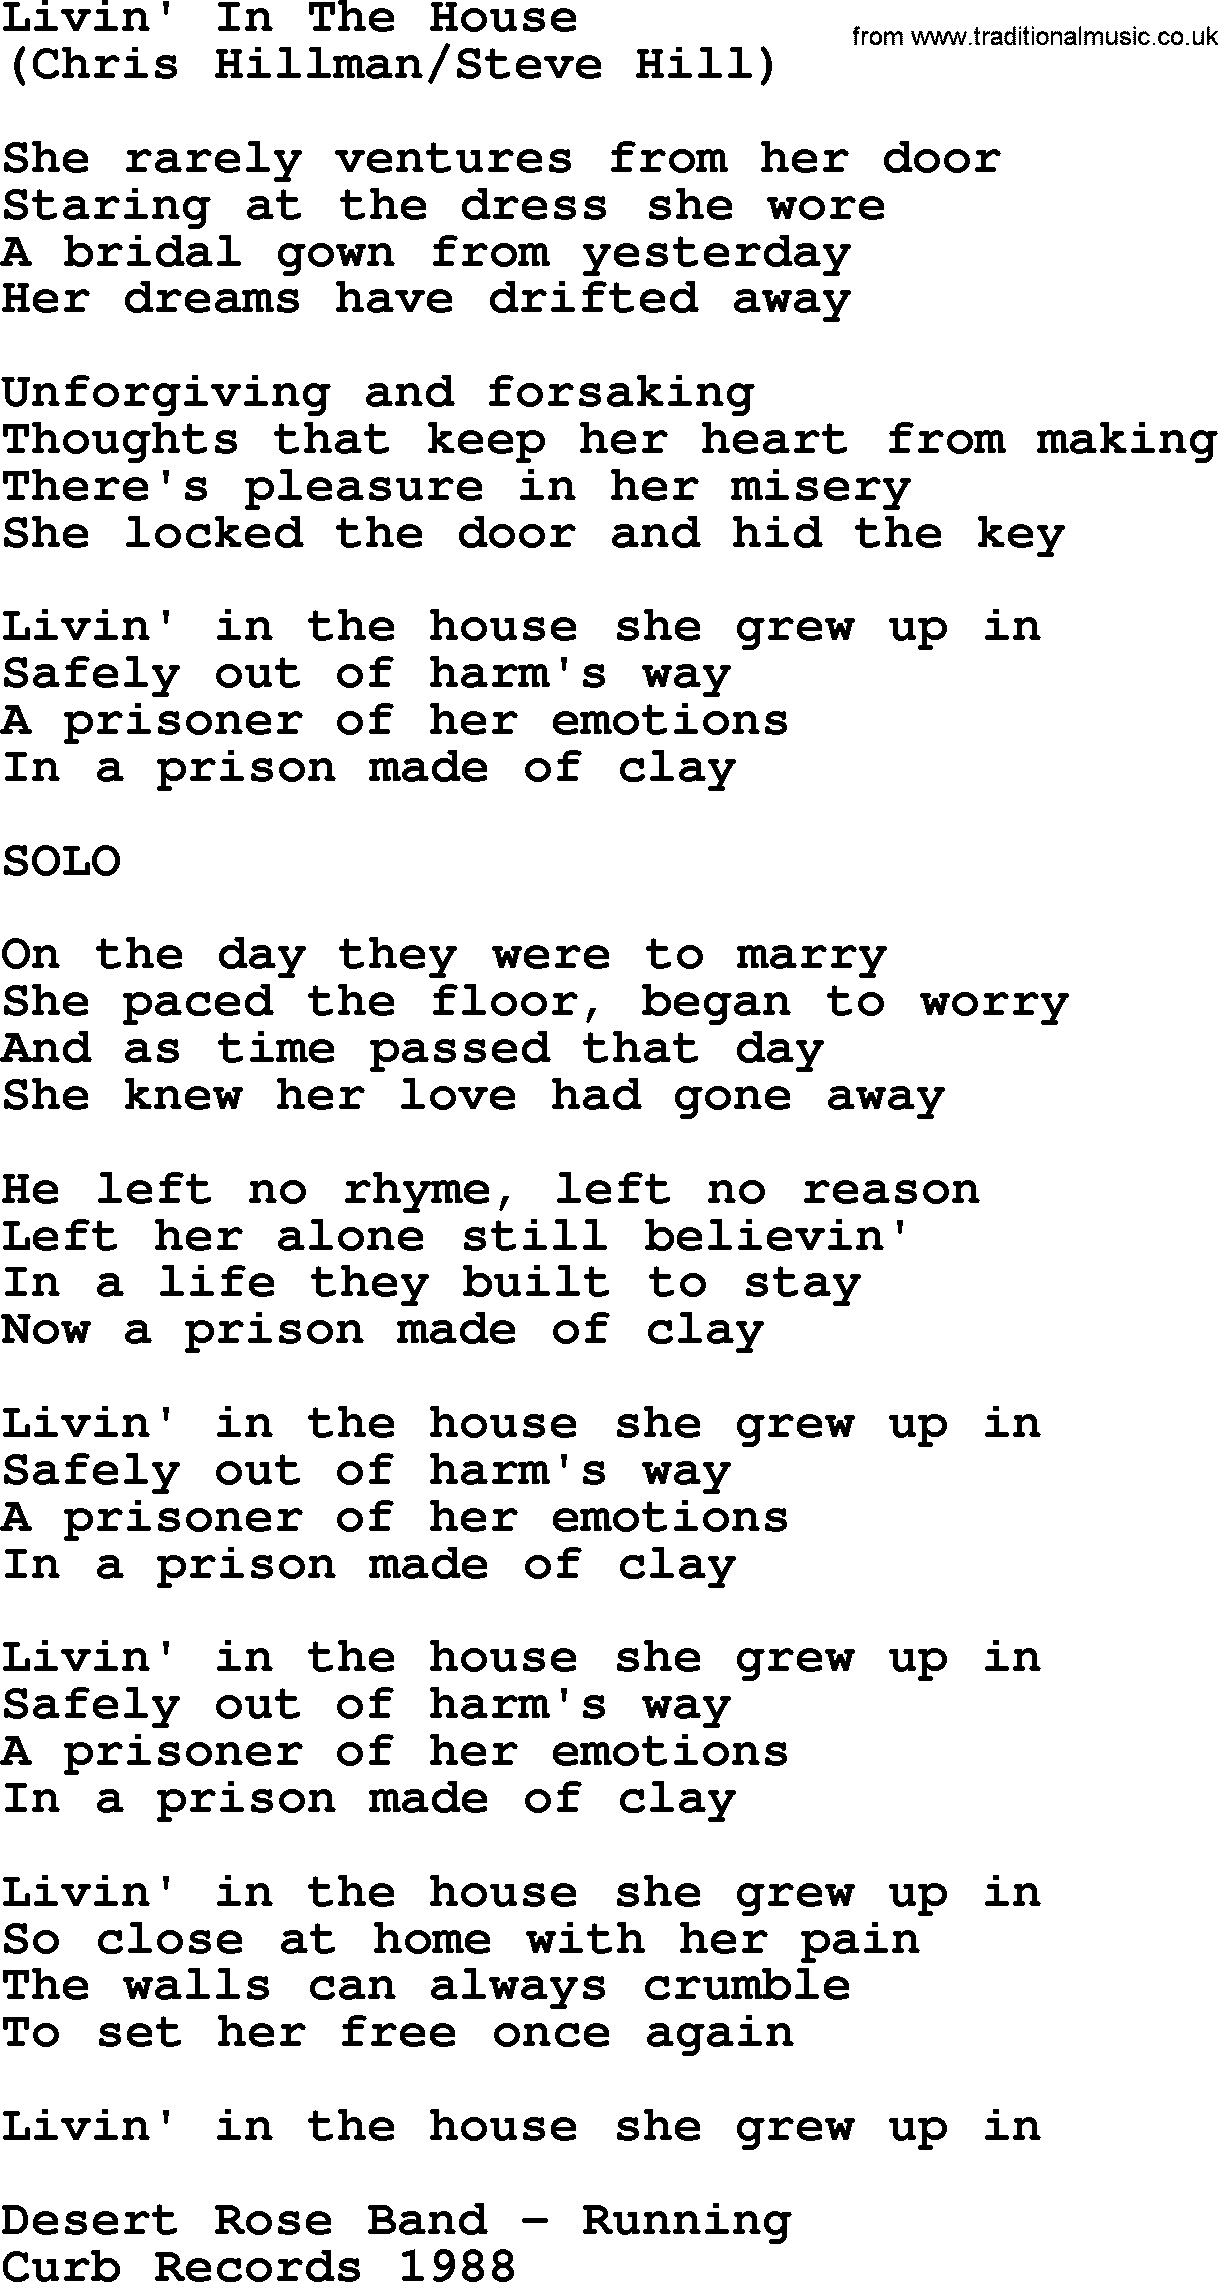 The Byrds song Livin' In The House, lyrics